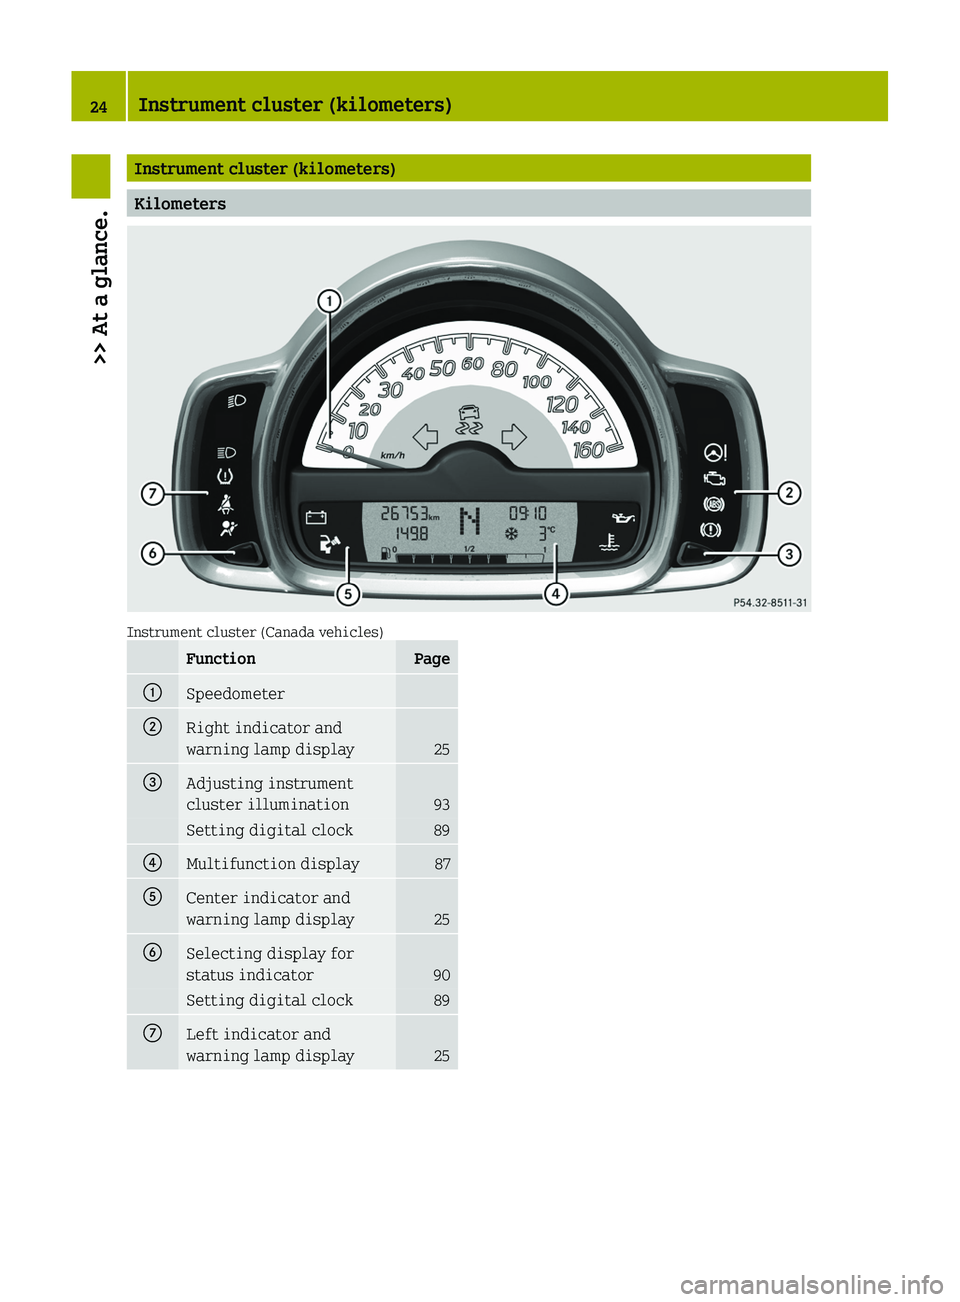 SMART FORTWO COUPE 2011  Owners Manual Instrument cluster (kilometers)
Kilometers
Instrument cluster (Canada vehicles)
FunctionPage0046Speedometer0047Right indicator and
warning lamp display
25
008AAdjusting instrument
cluster illumination